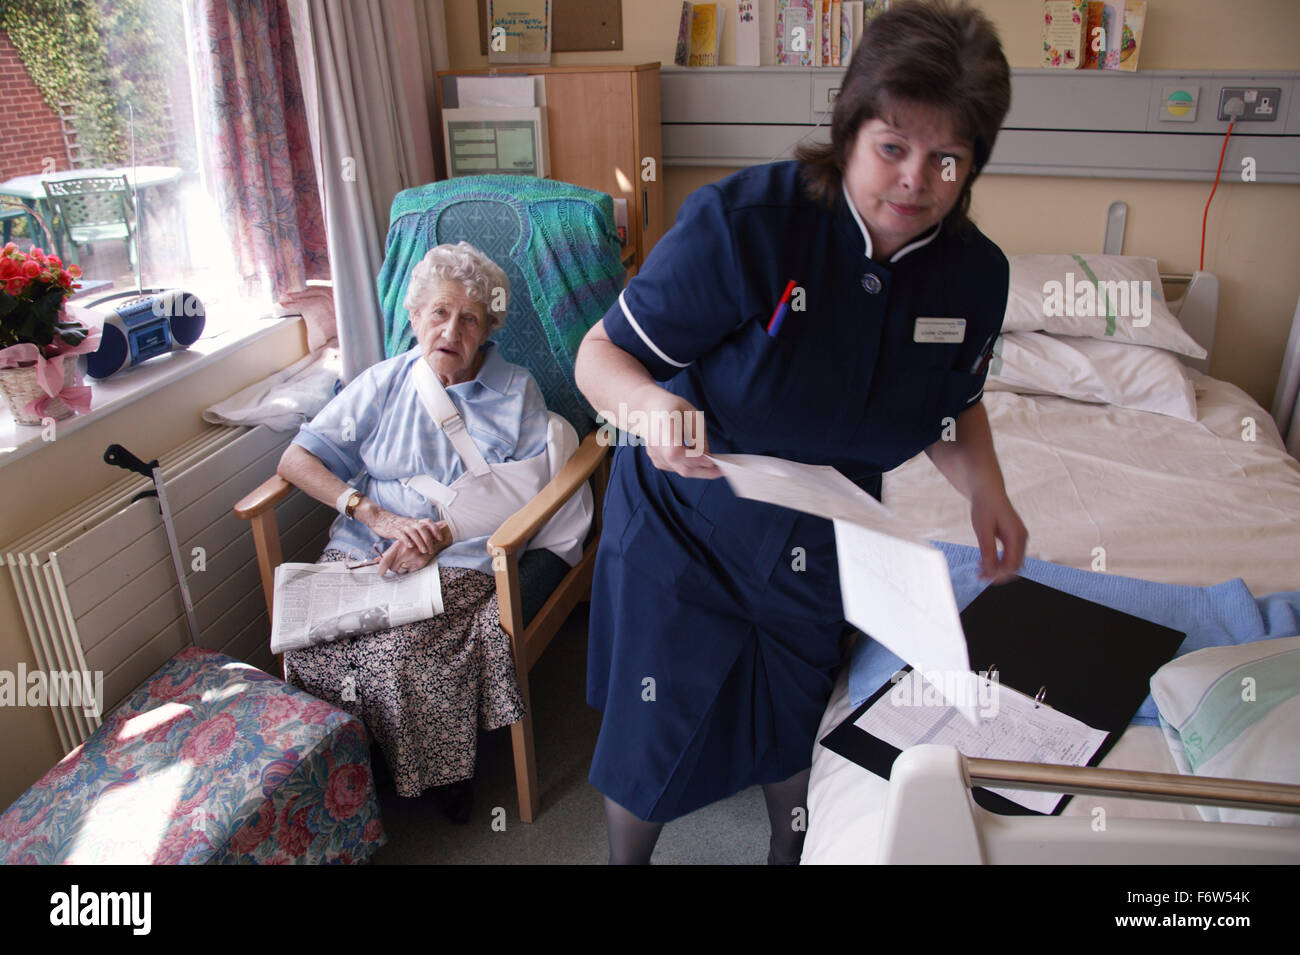 Nurse with disability consulting elderly patient's medical notes in hospital, Stock Photo